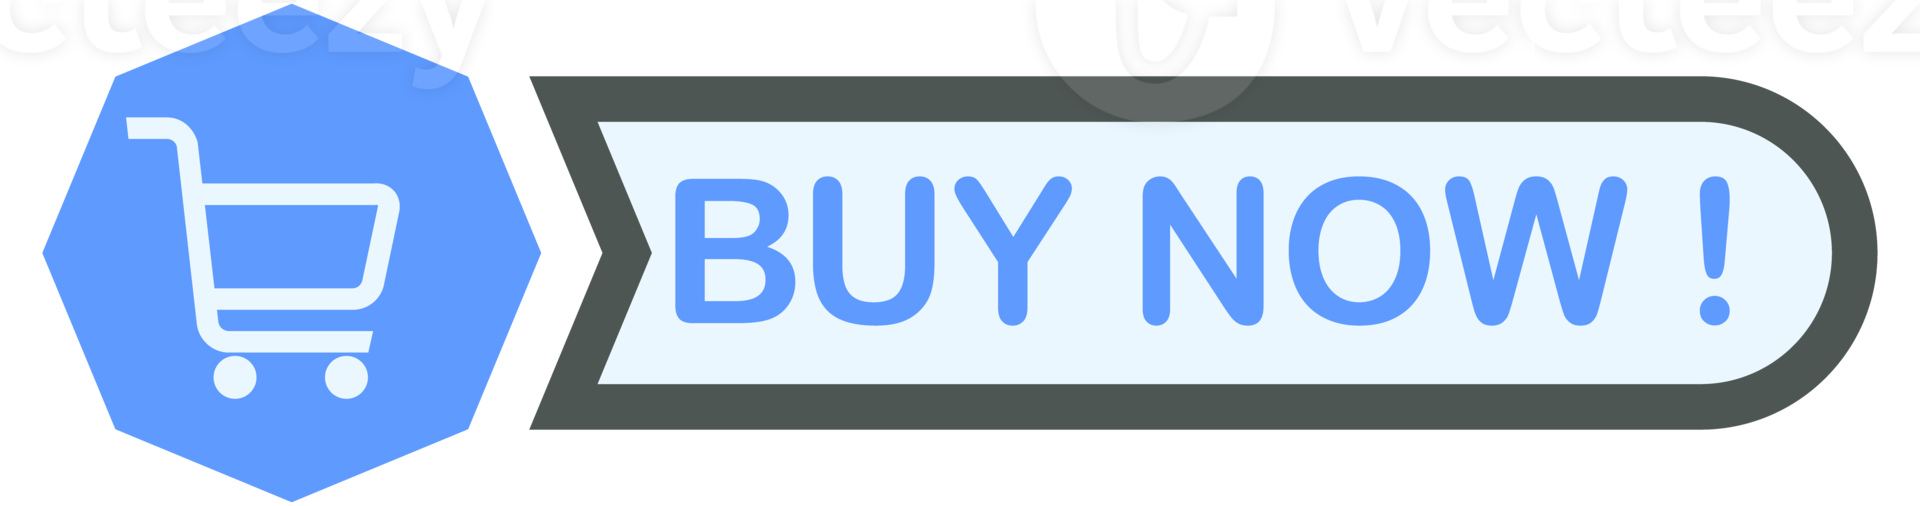 Basic Shape Buy Now Button Label Name Tag png